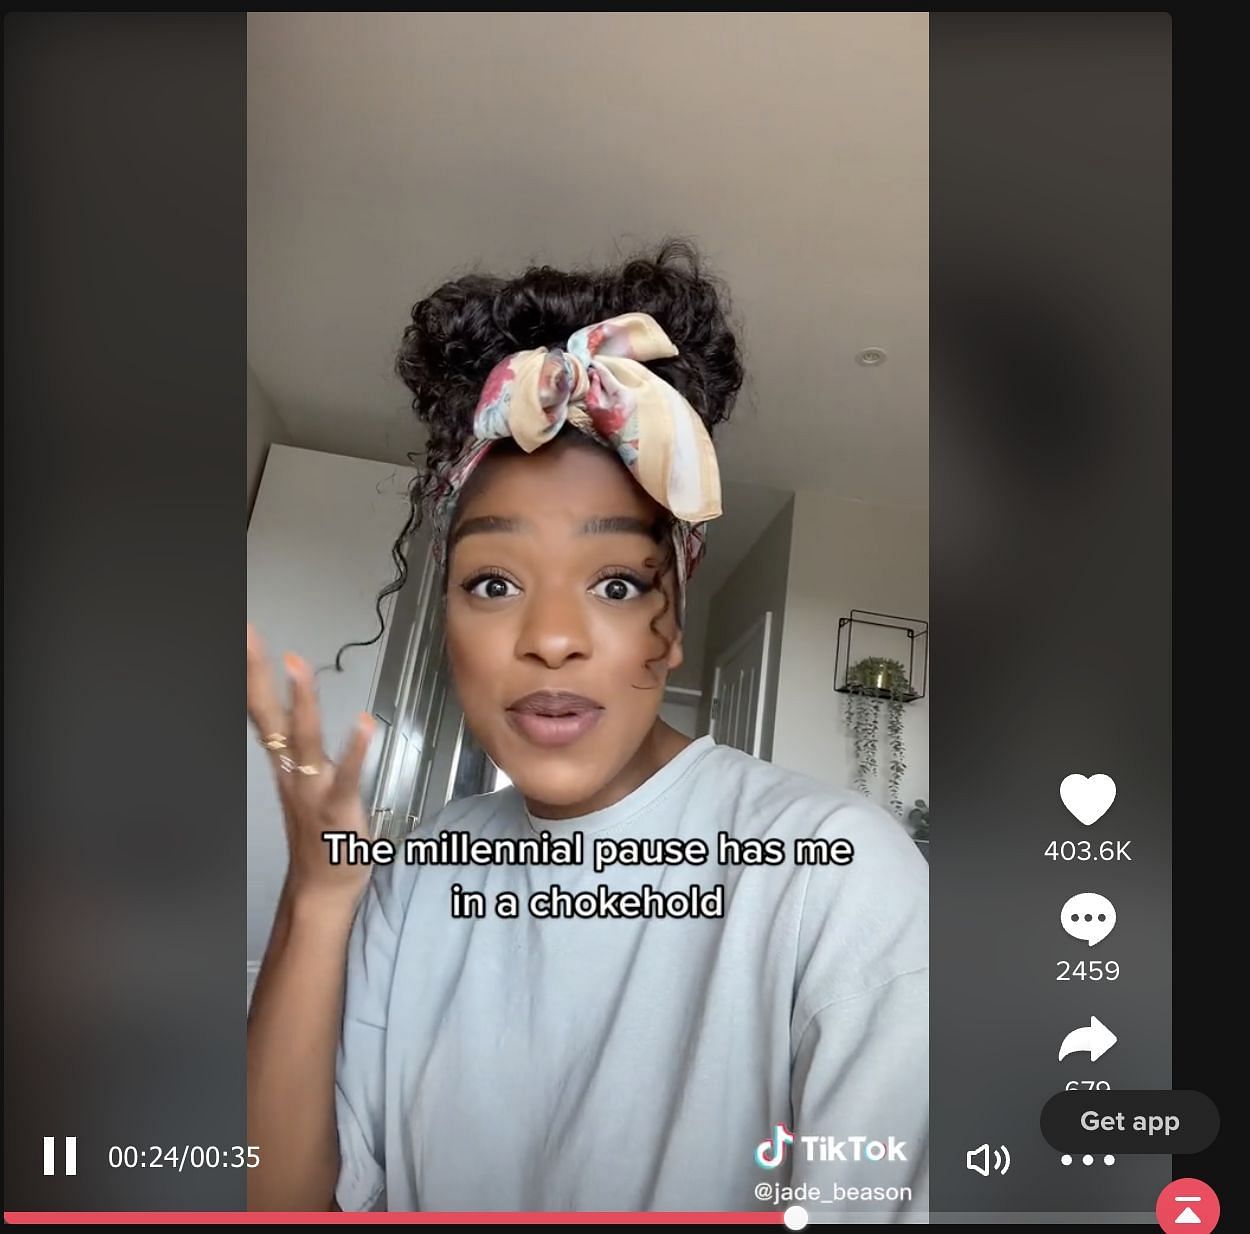 Social media users talk about the &quot;millenial Pause,&quot; where the content creator pauses for a second or two before beginning to speak in a video. (Image via TikTok)